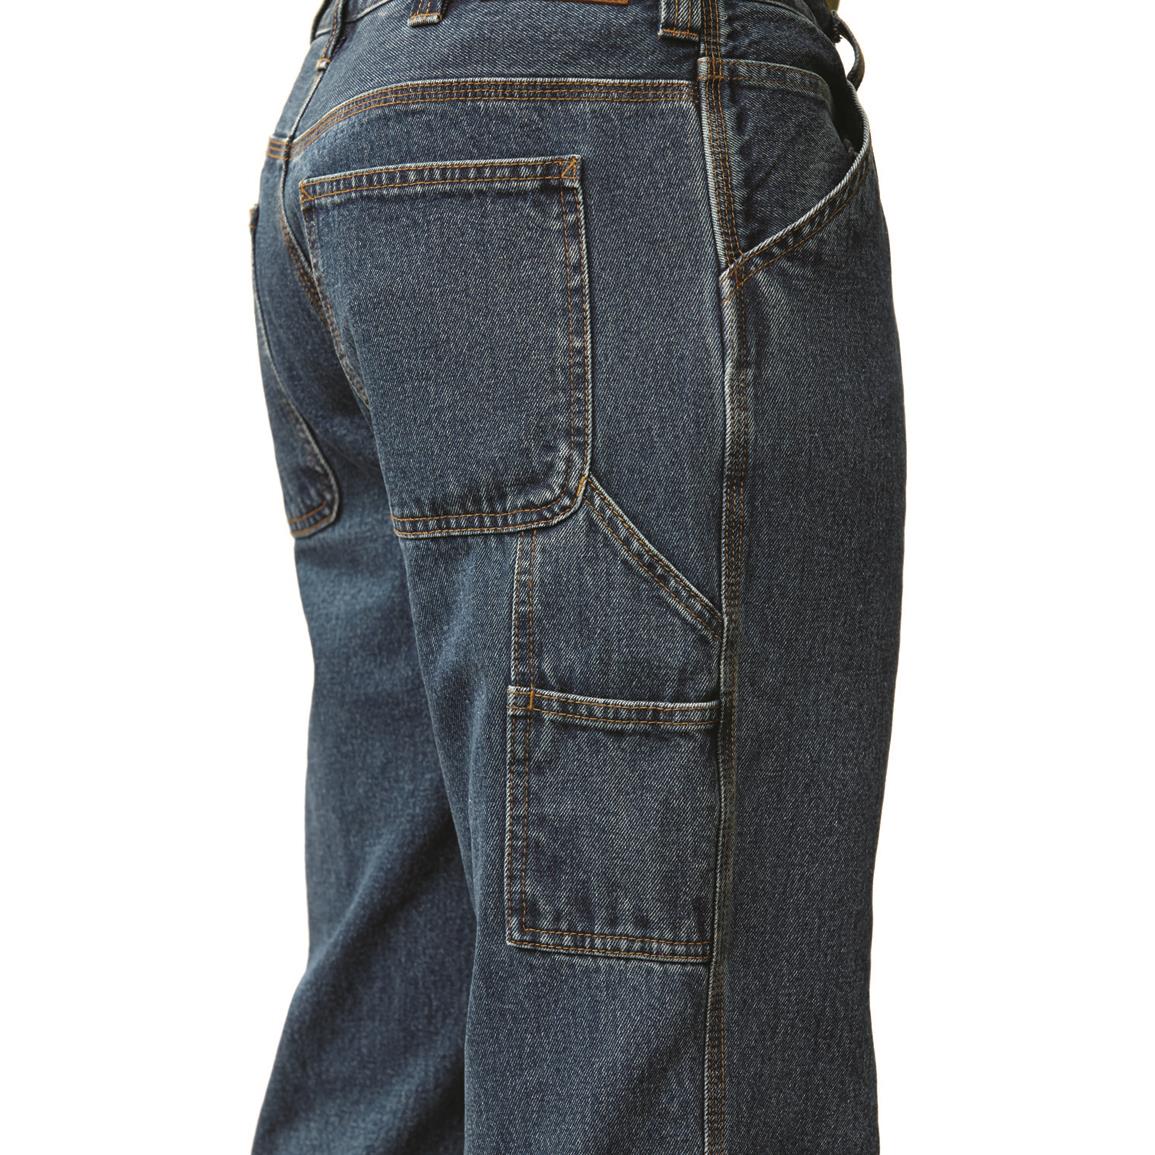 Guide Gear Mens 5 Pocket Carpenter Jeans 221531 Jeans And Pants At